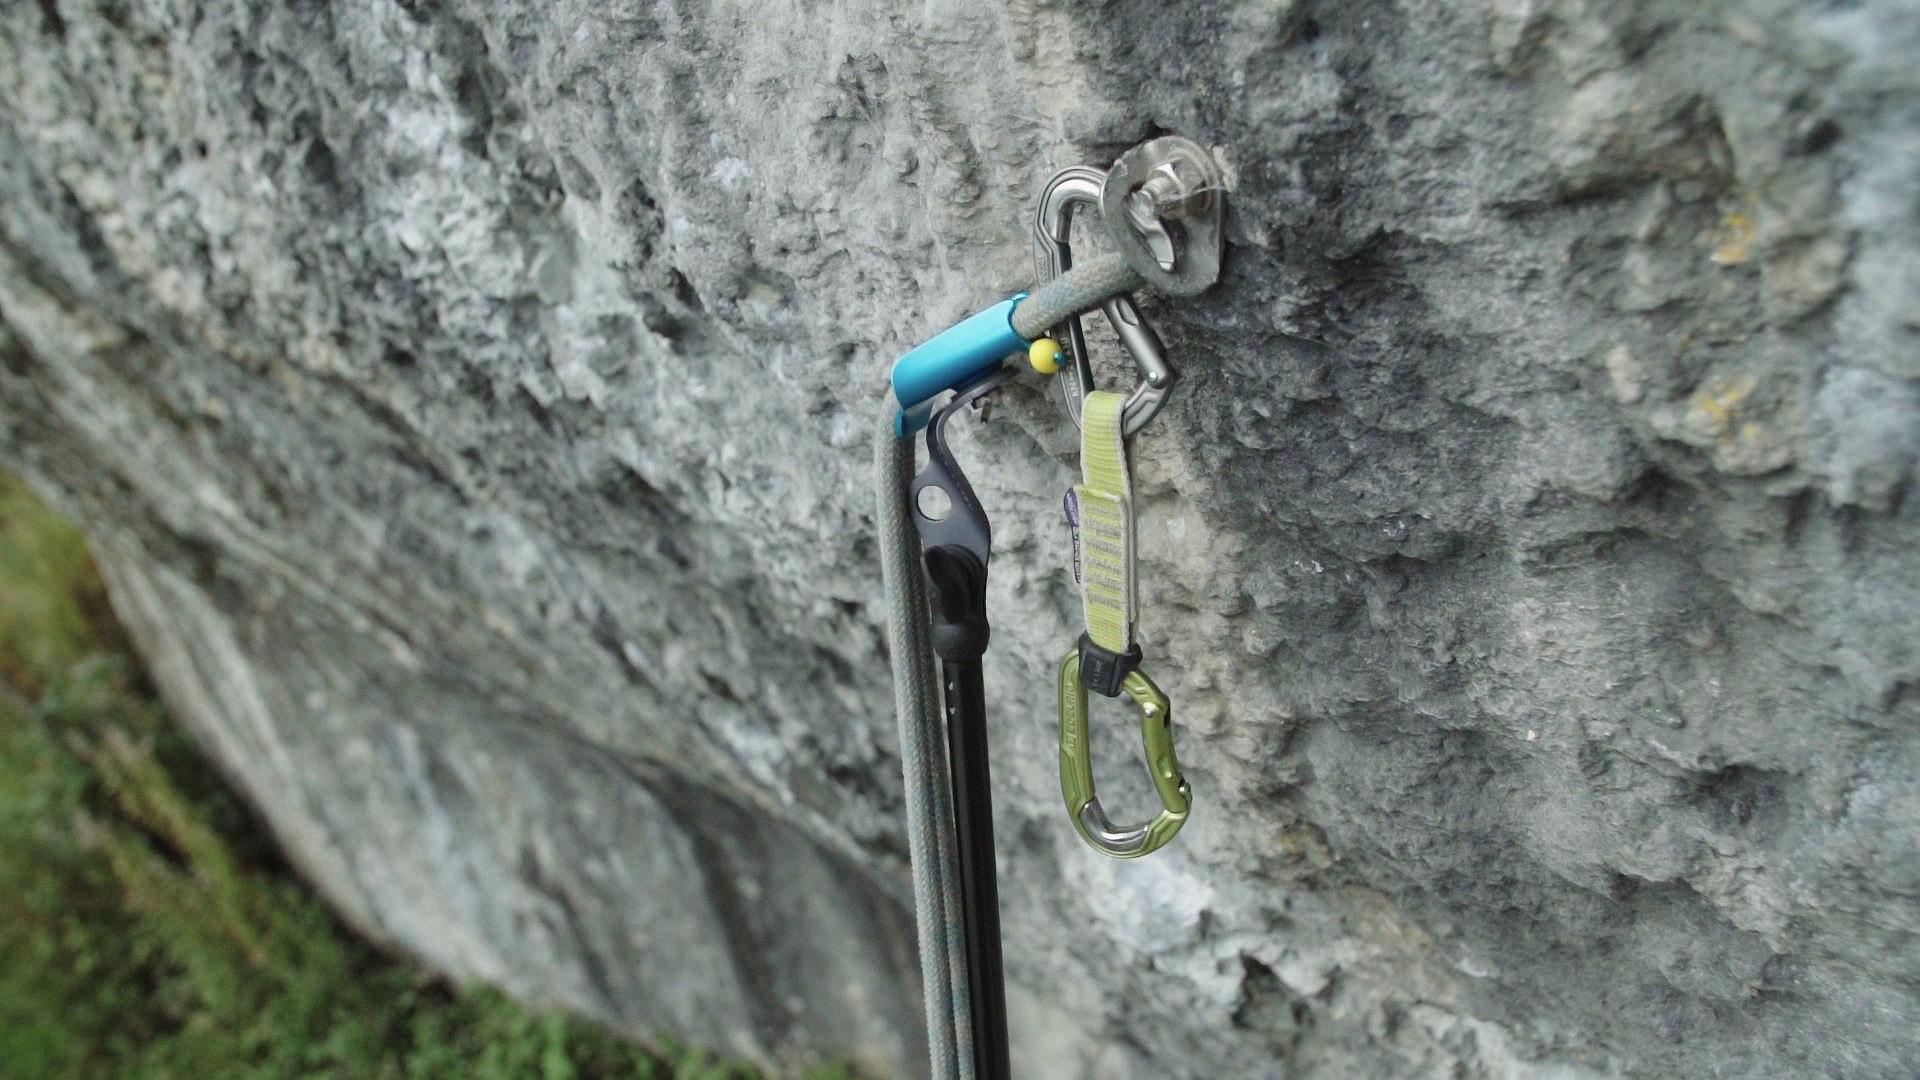 Unclipping a quickdraw from the bolt  © UKC Gear